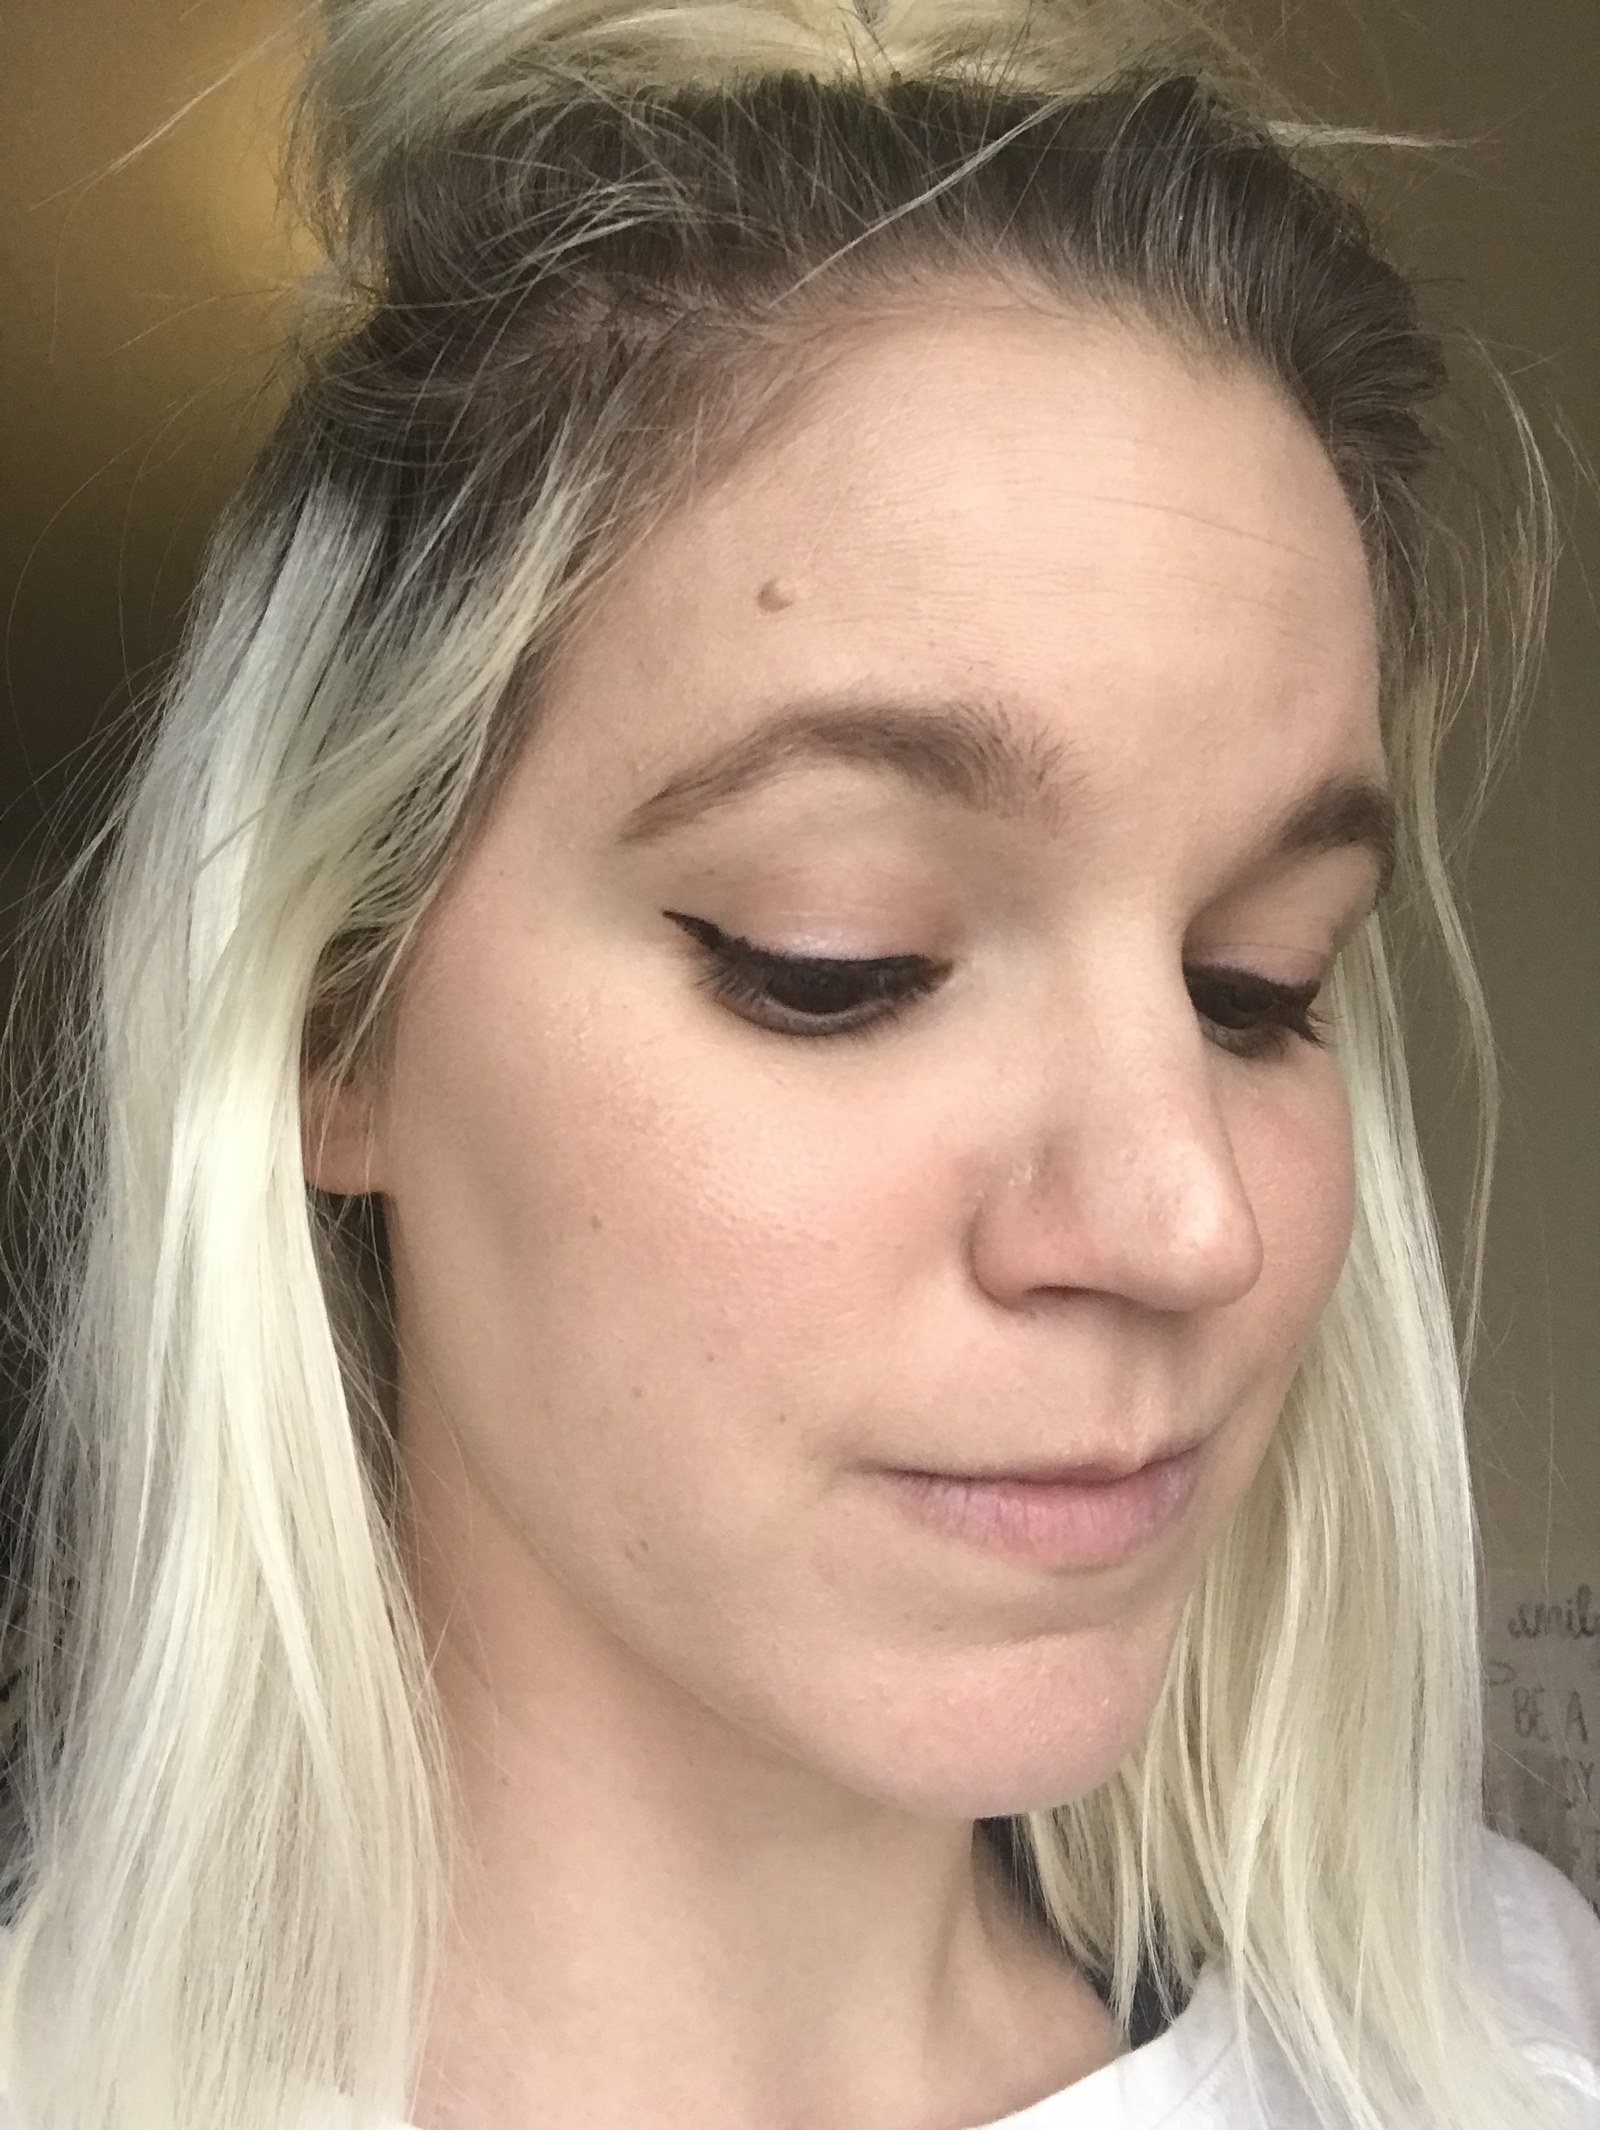 As A Liquid Liner Dummy, I Tried 5 Dummy-Proof Liquid Lining Products